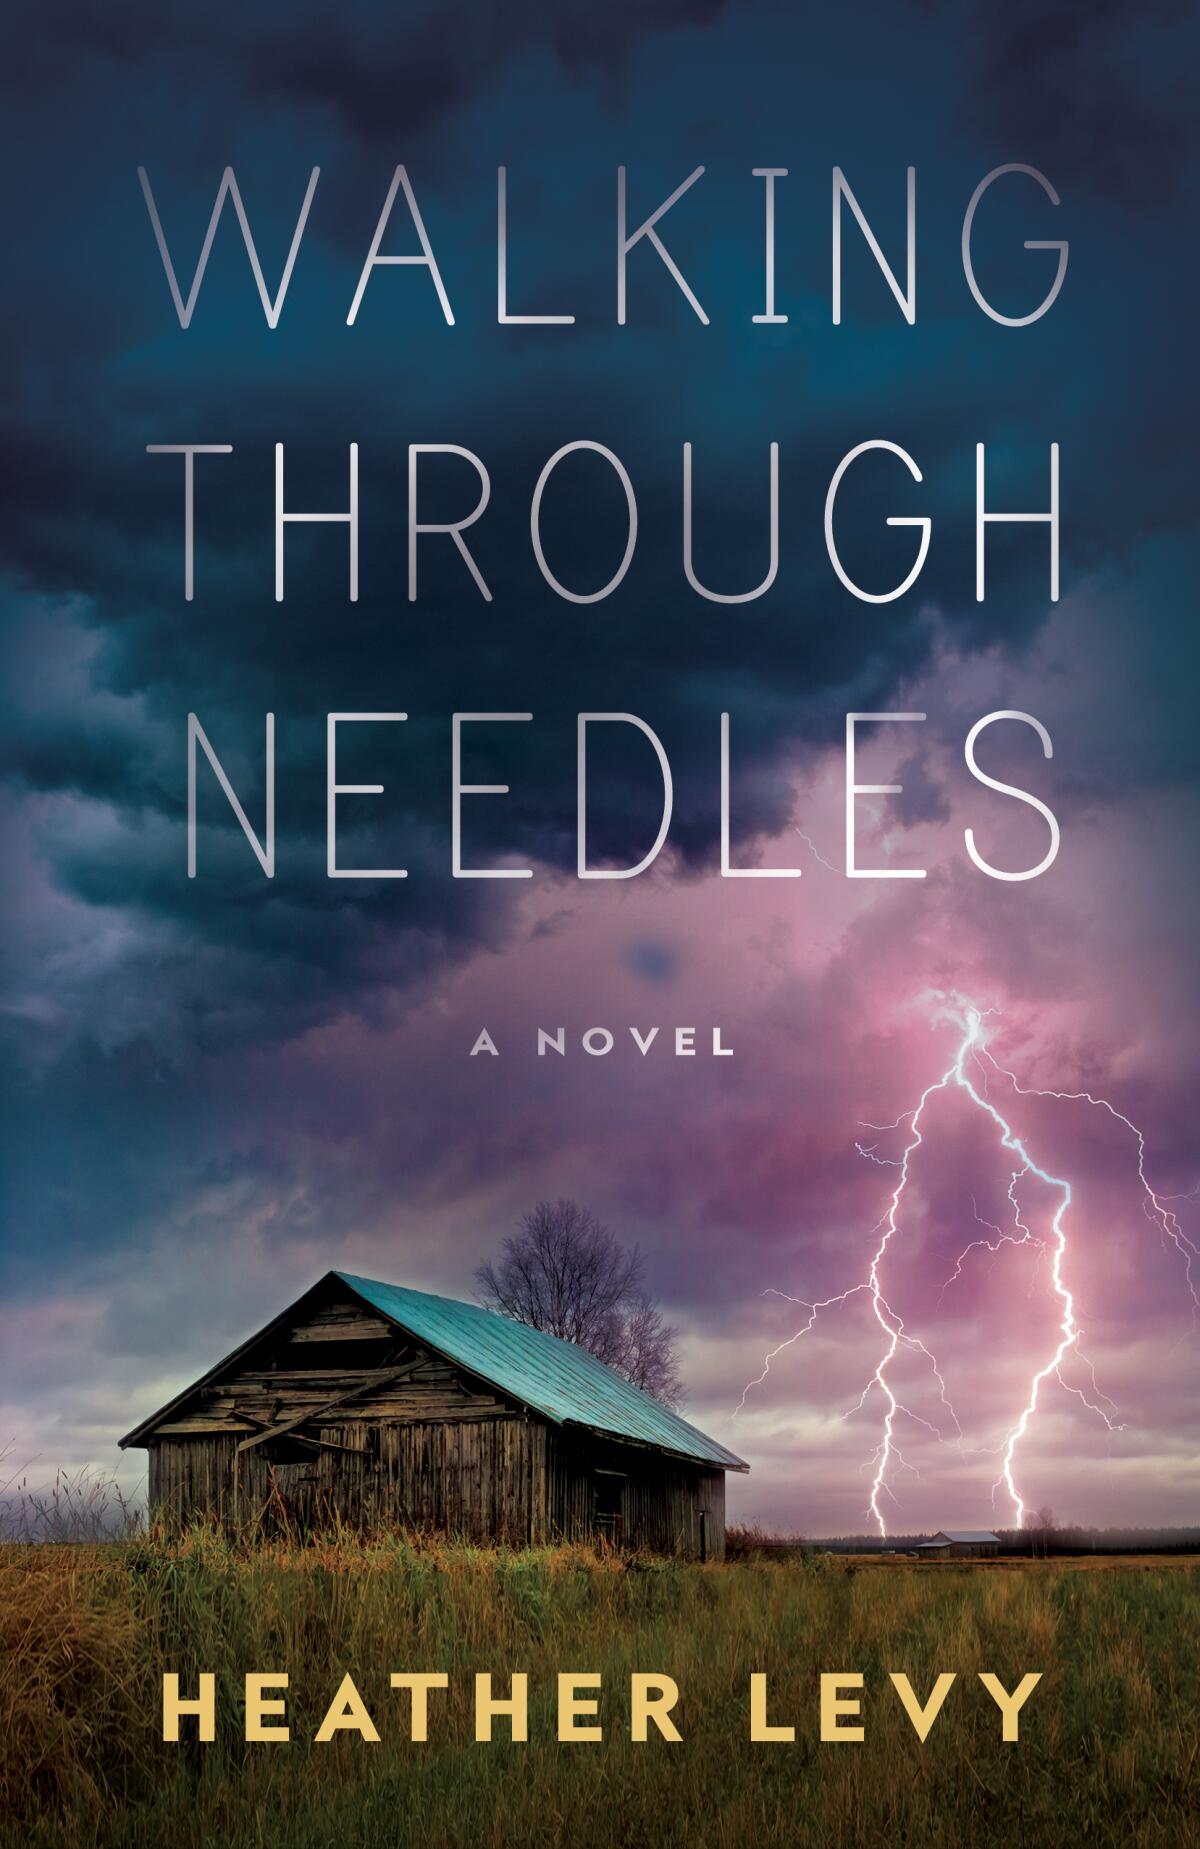 Lightning hits near a wooden shed on a book cover